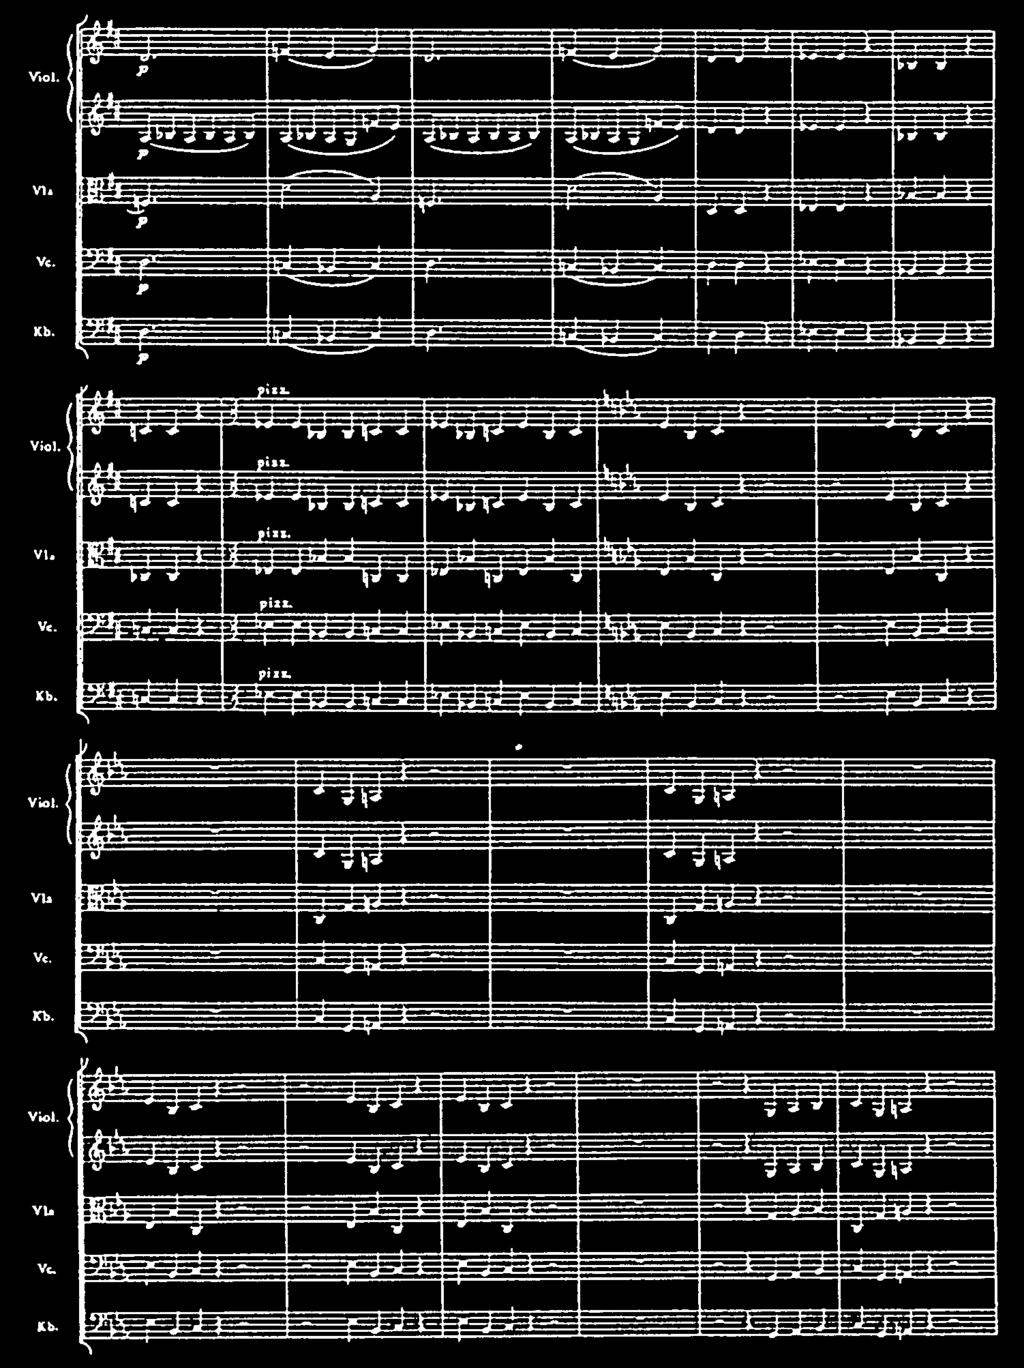 In the finale, the motif appears more prominently than ever: twelve times between measures 184-200 (Ex. 4), five times between measures 216-219 (Ex. 5), and eight times in the Coda (mm.